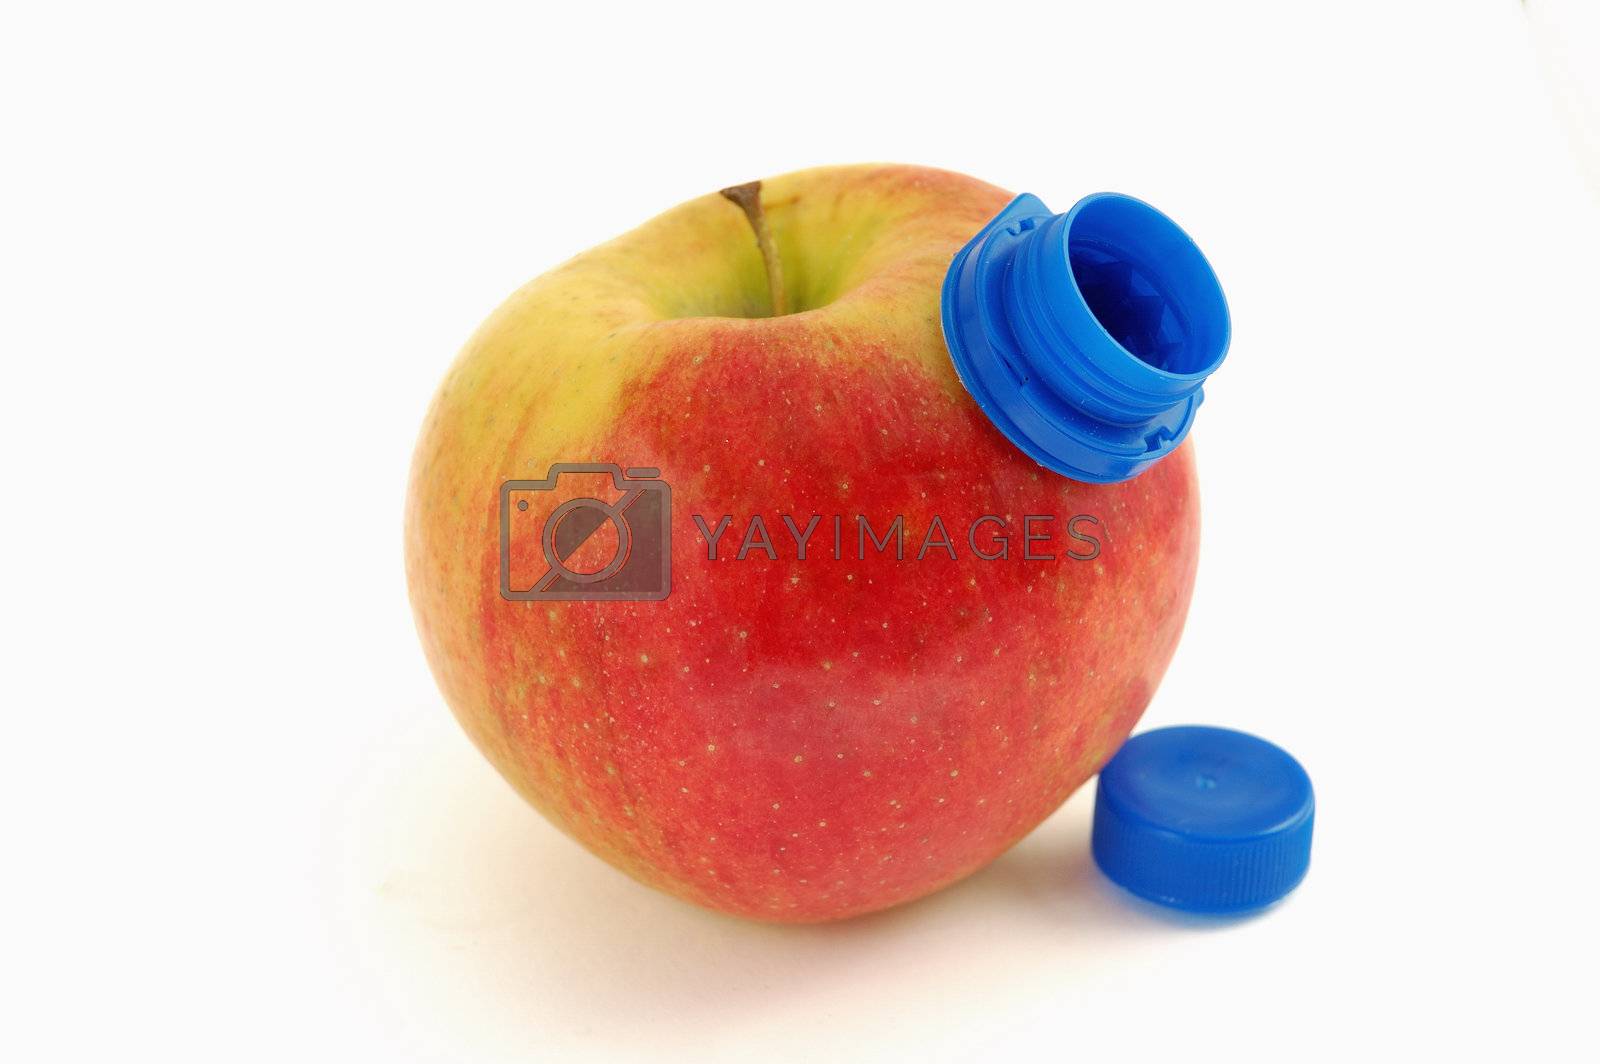 Royalty free image of drinking apple by aletermi